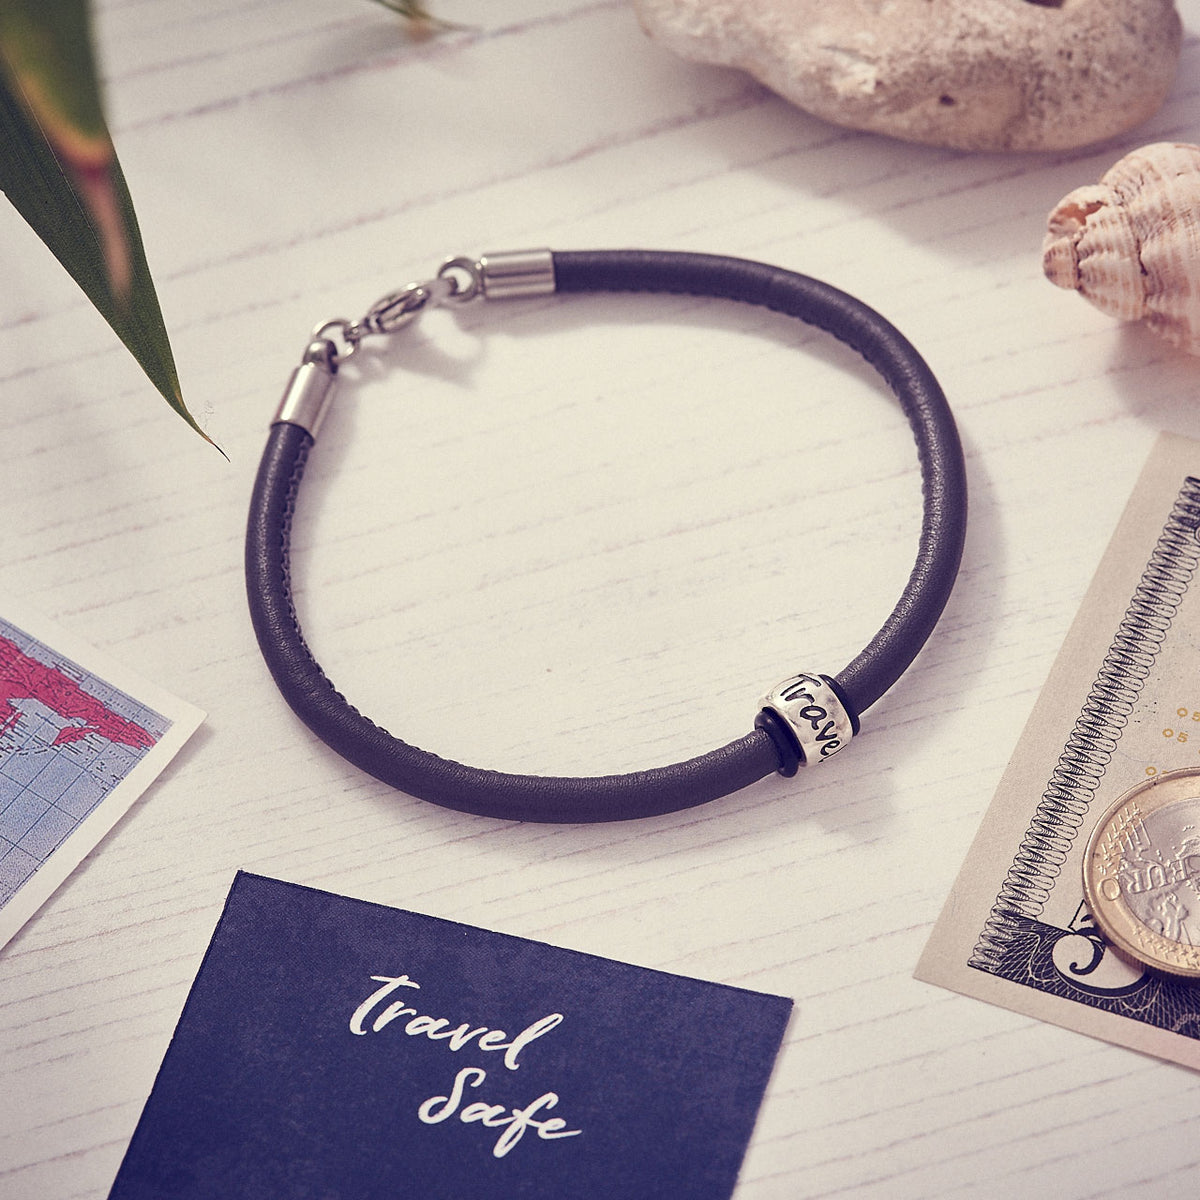 Travel Safe Silver &amp; Italian Stitched Leather Bracelet Black - alternative travel gift from Off The map Brighton